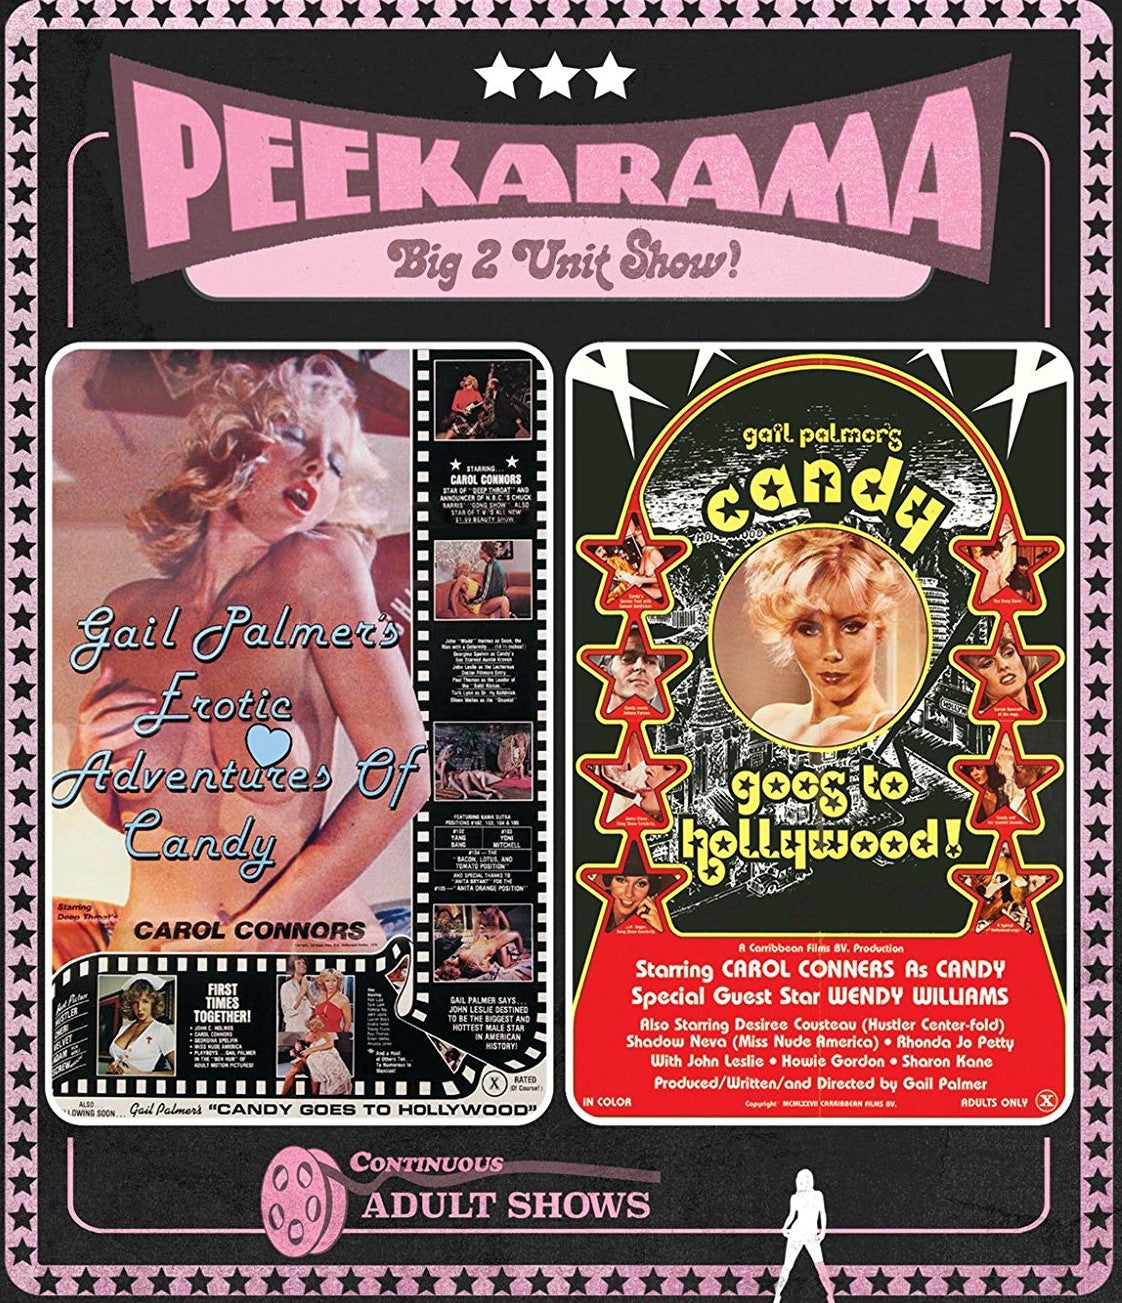 Erotic Adventures Of Candy / Goes To Hollywood Blu-Ray Blu-Ray